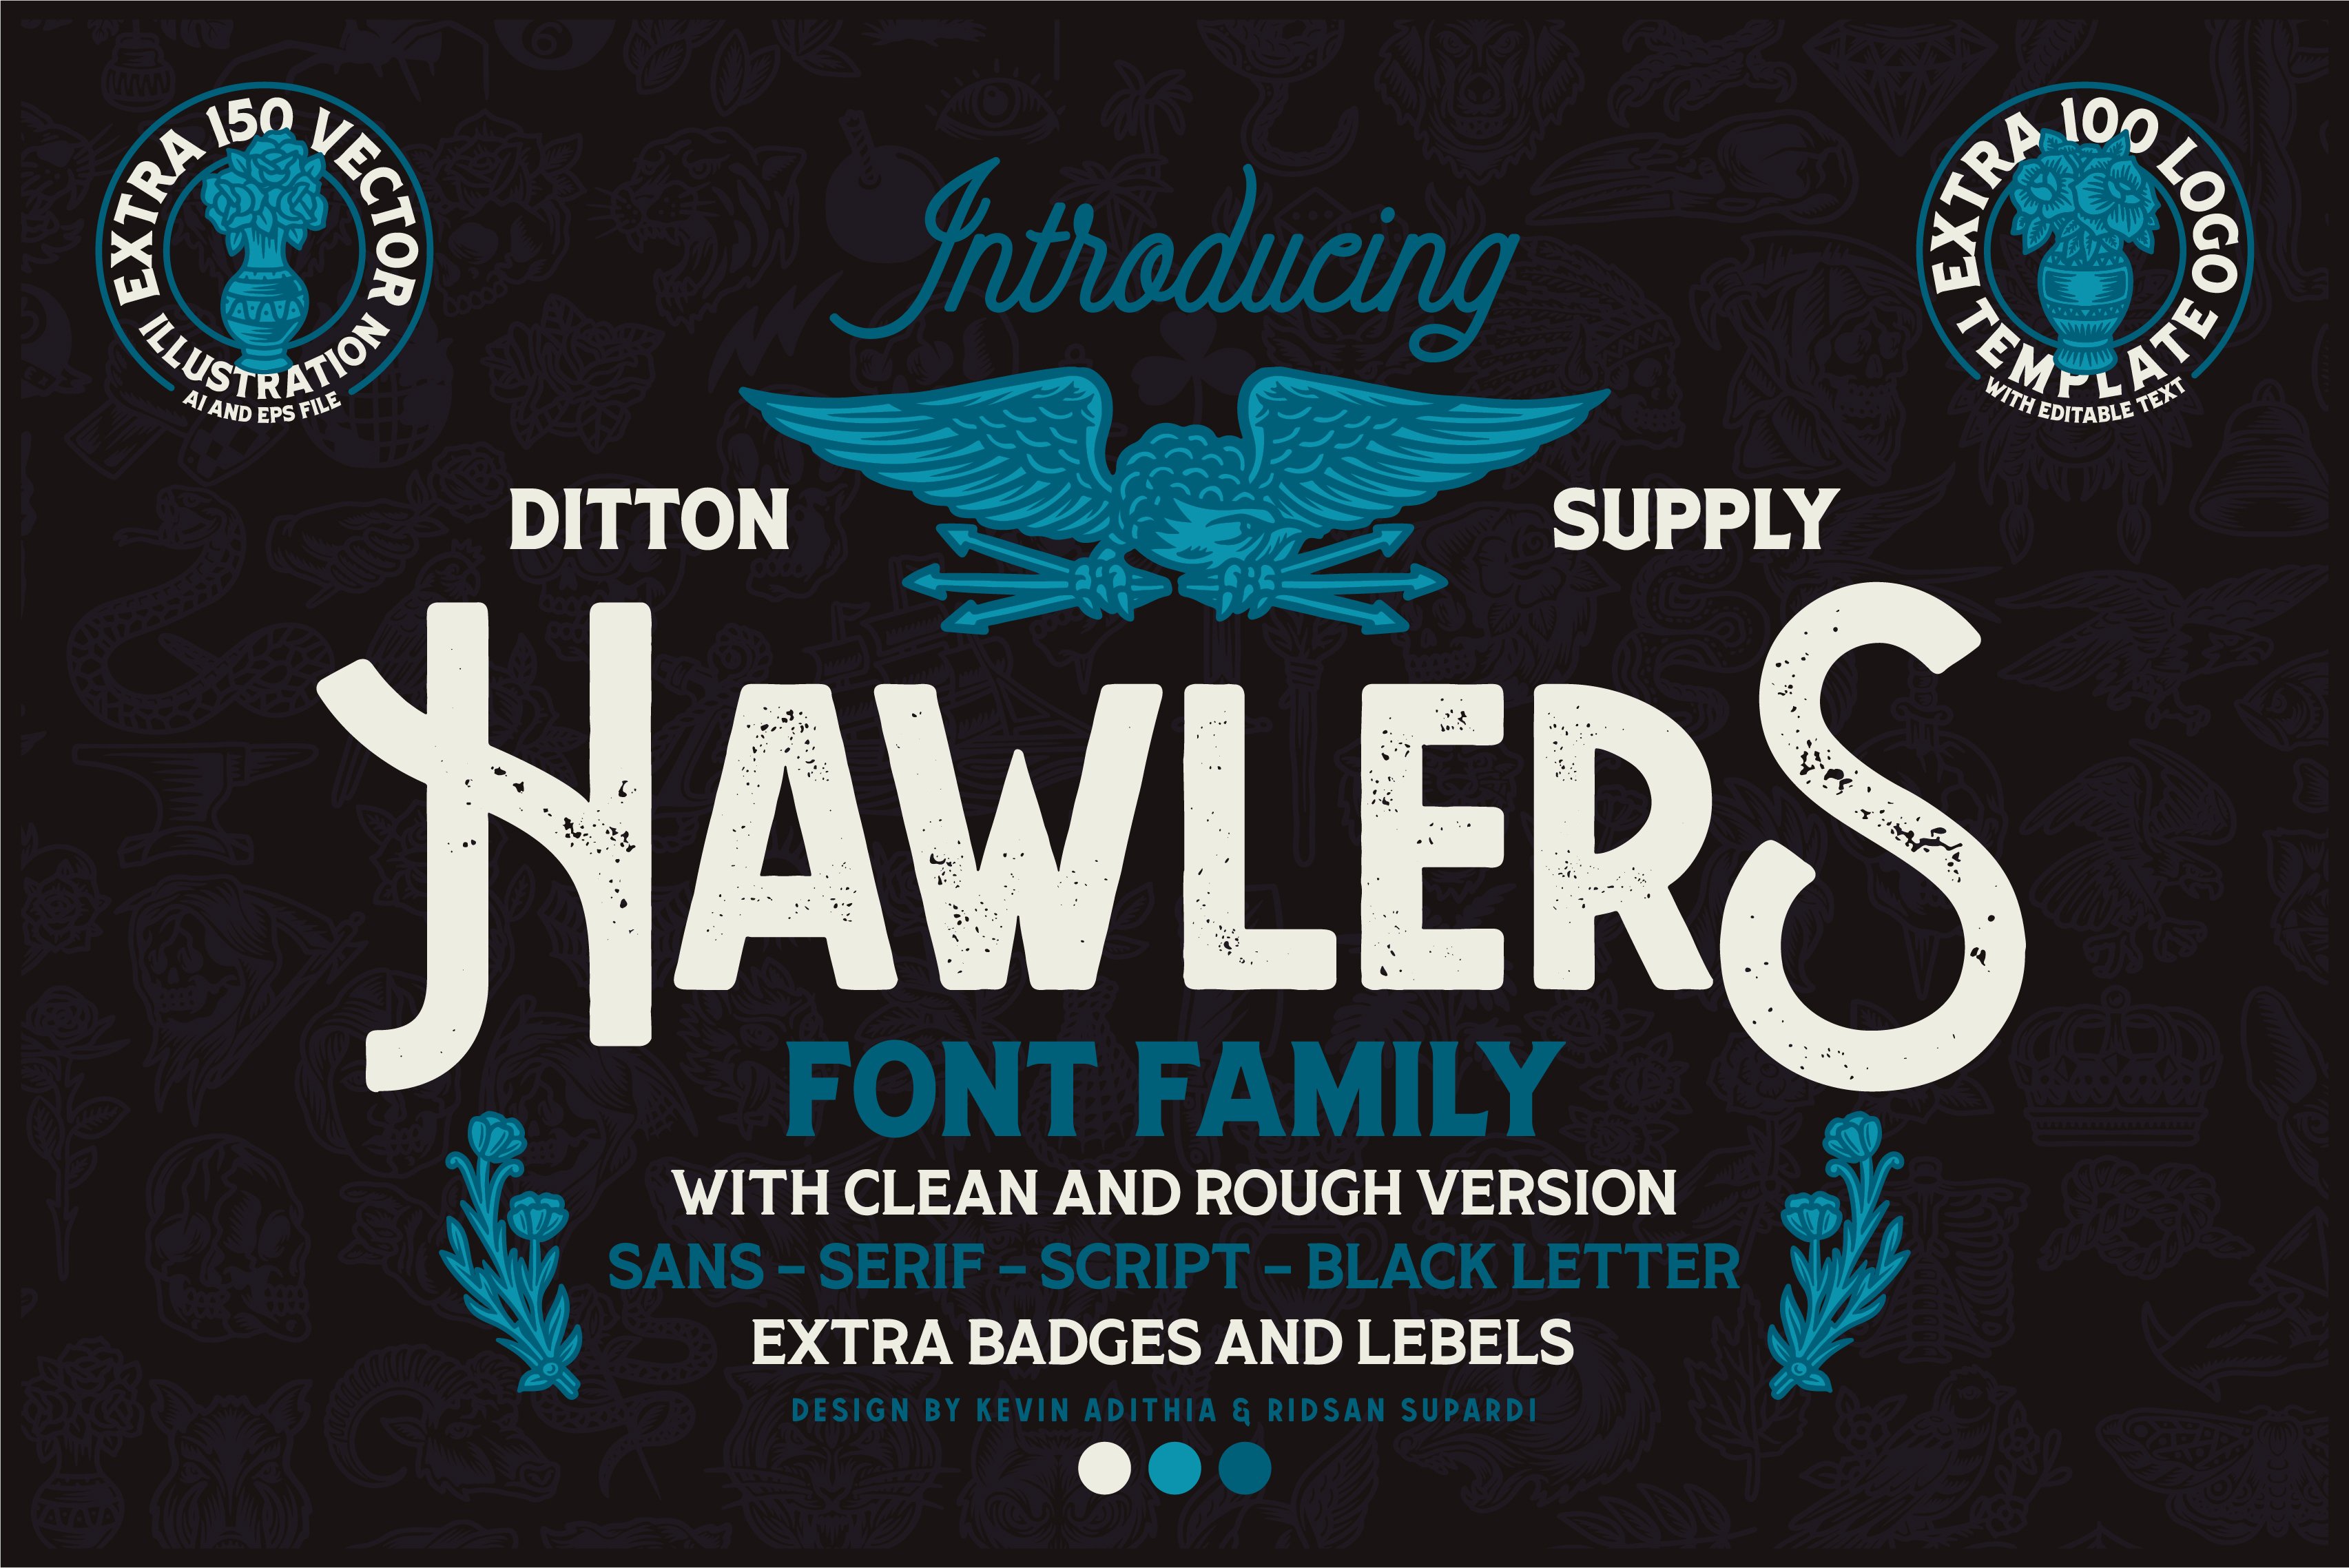 Hawlers Font Family + Extras cover image.